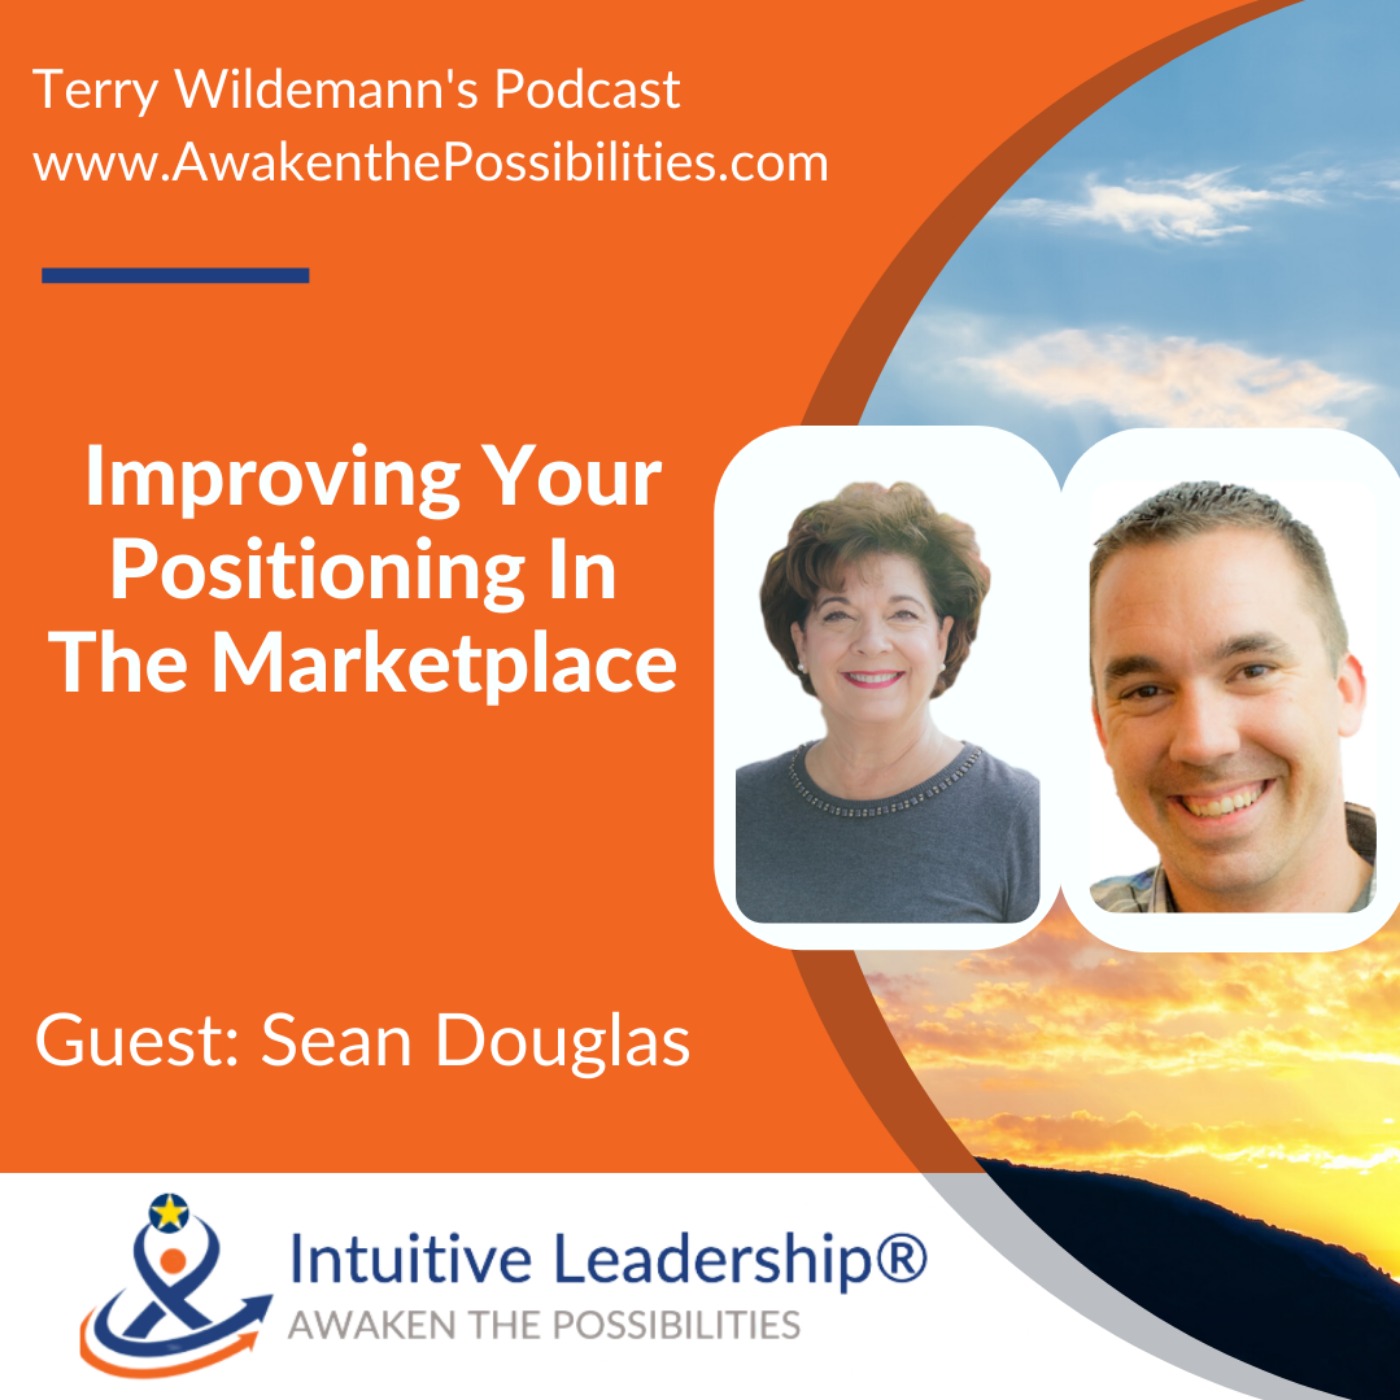 Improving Your Positioning In The Marketplace